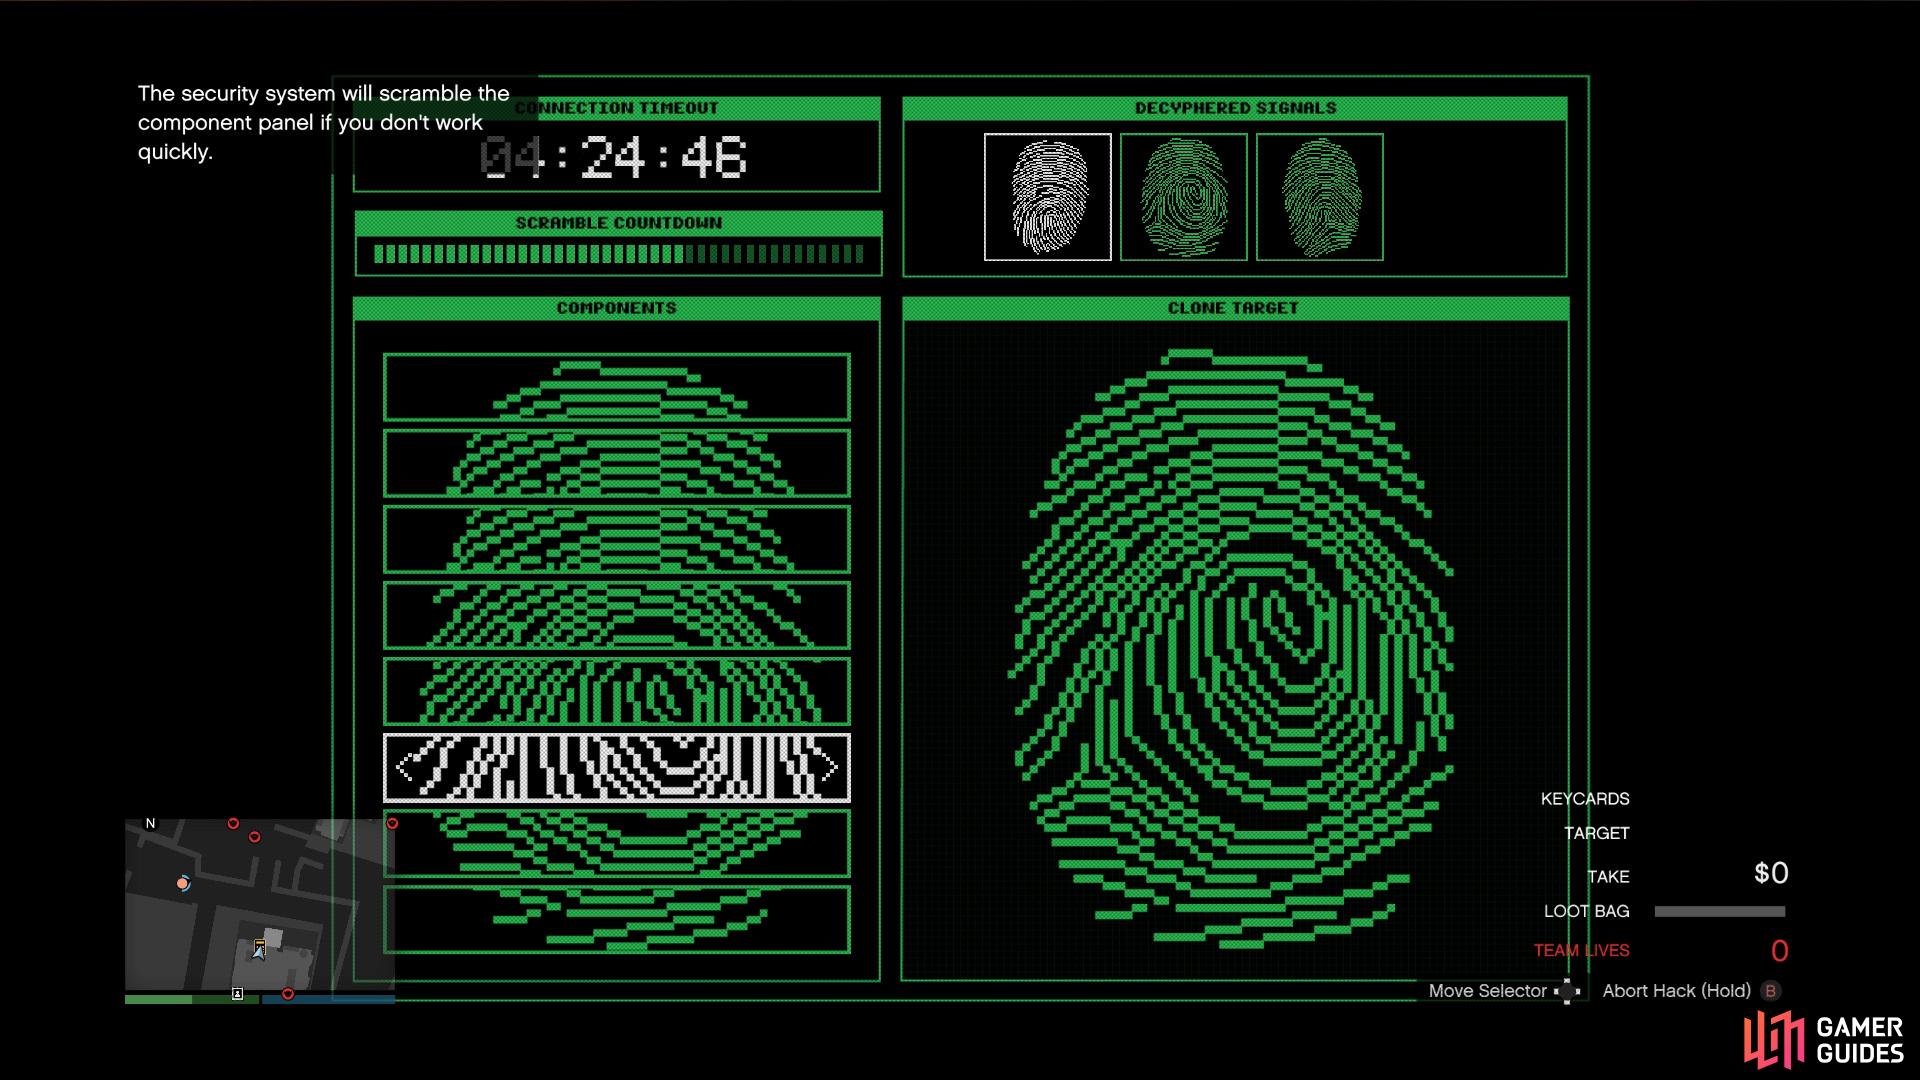 then once you're inside head up to the top of the marked building and hack the fingerprint scanner. 